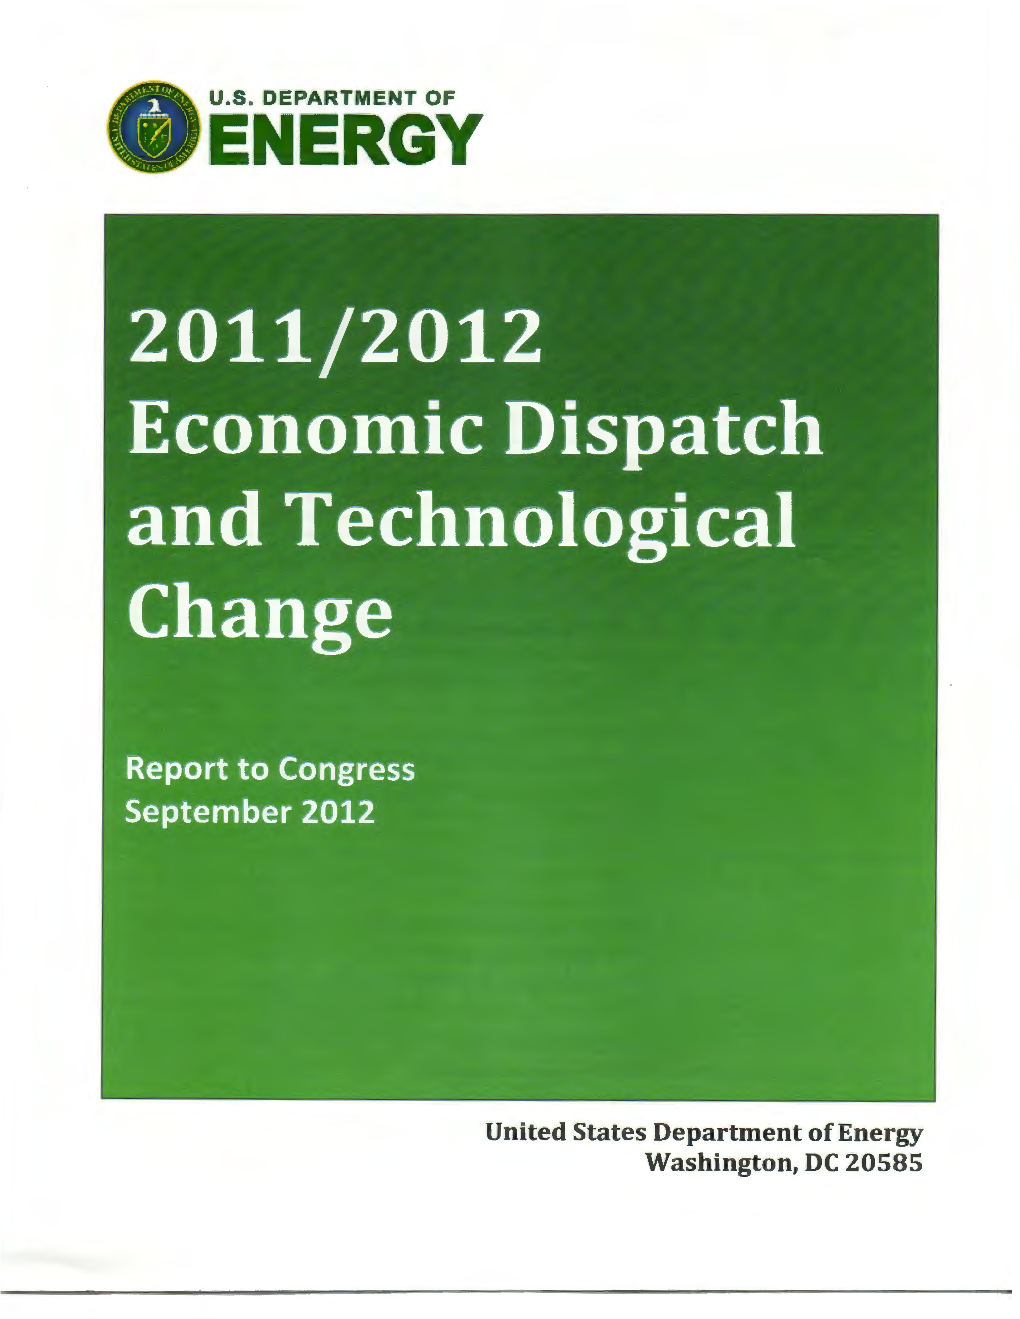 2011/2012 Economic Dispatch and Technological Change